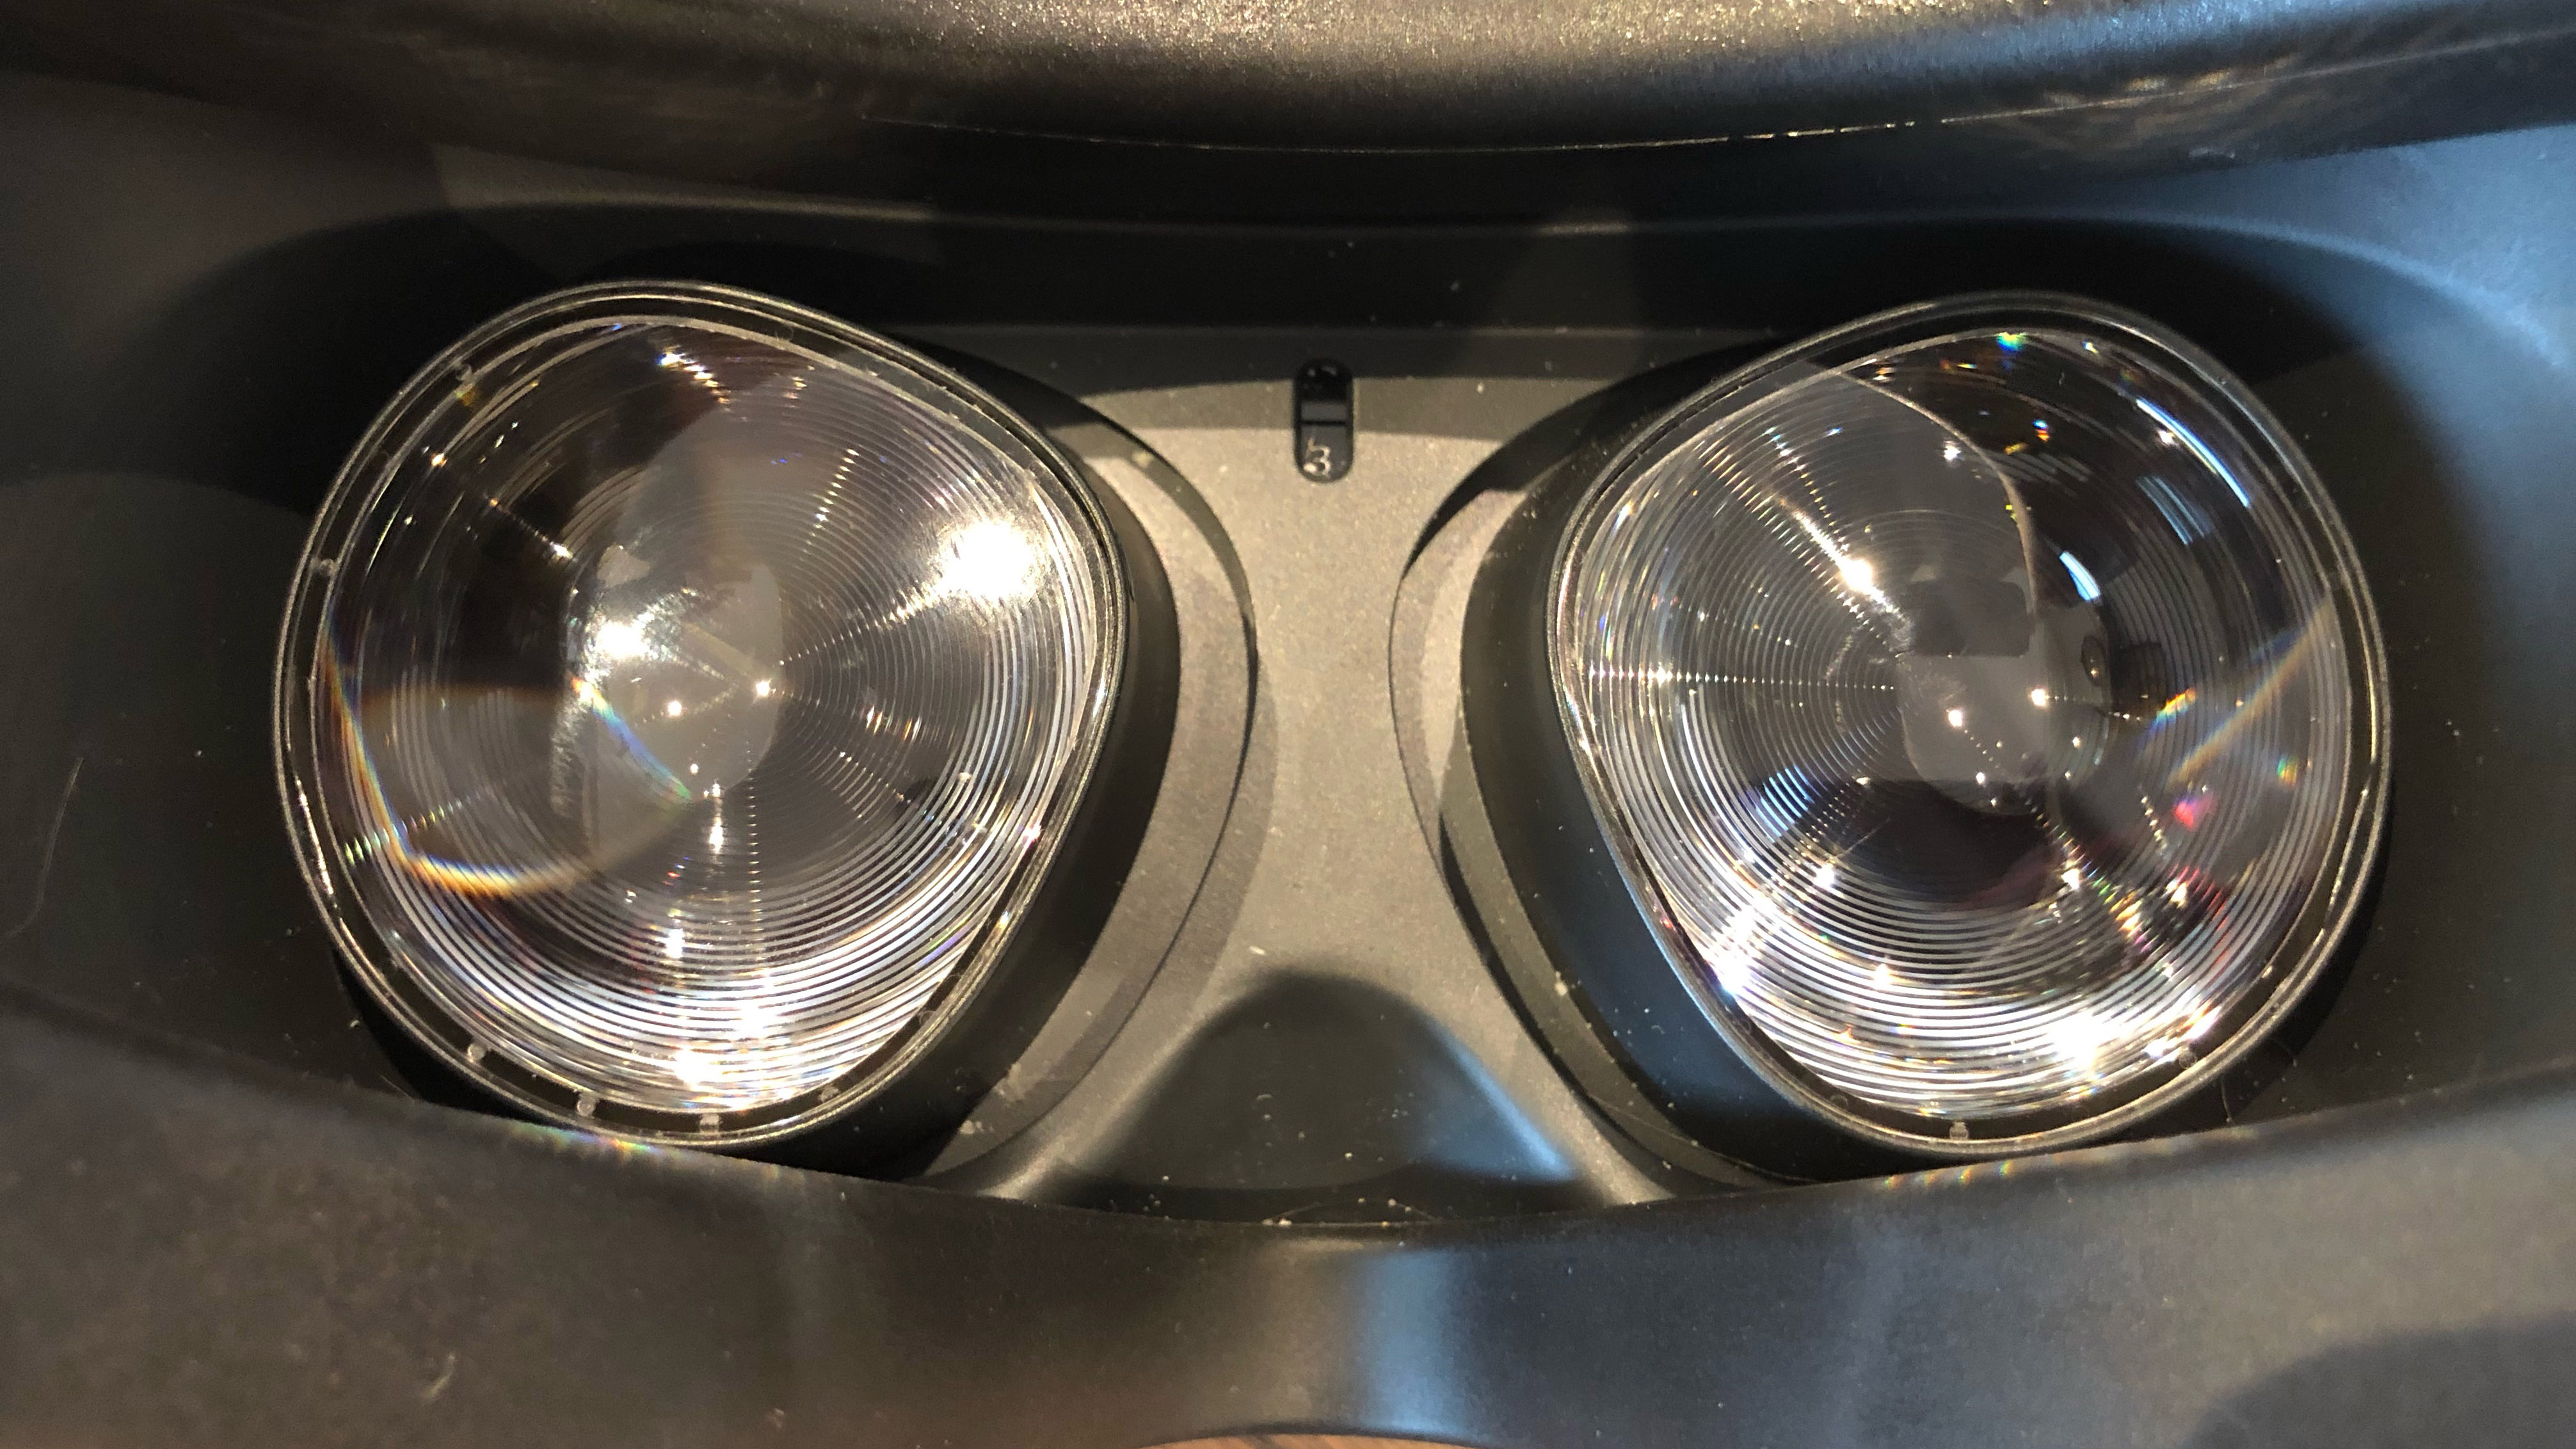 How to clean Oculus lenses quickly and safely